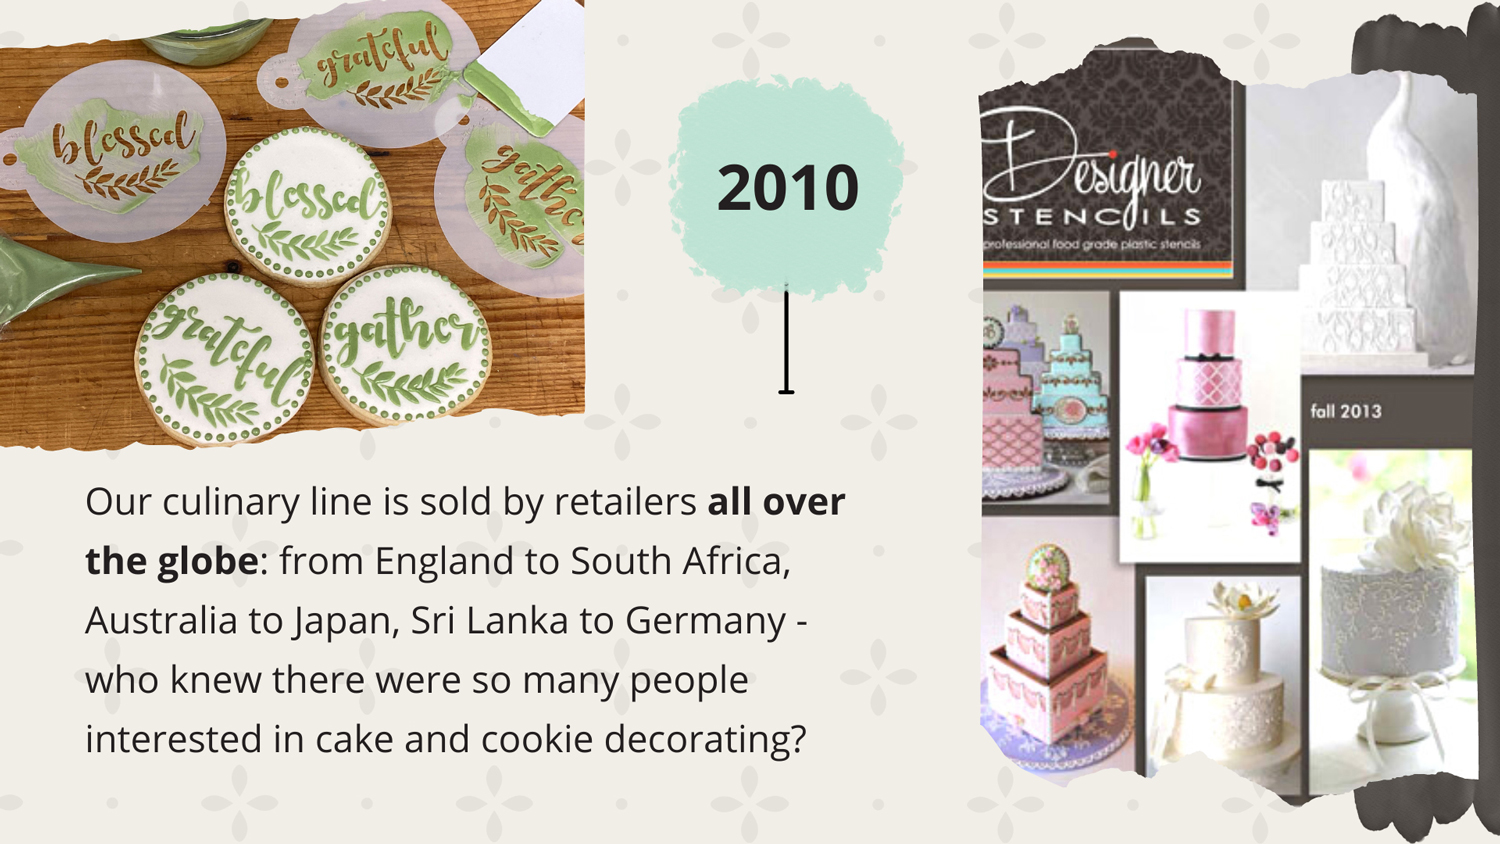 2010 - Our culinary line is sold by retailers all over the globe: from England to South Africa, Australia to Japan, Sri Lanka to Germany - who knew there were so many people interested in cake and cookie decorating?